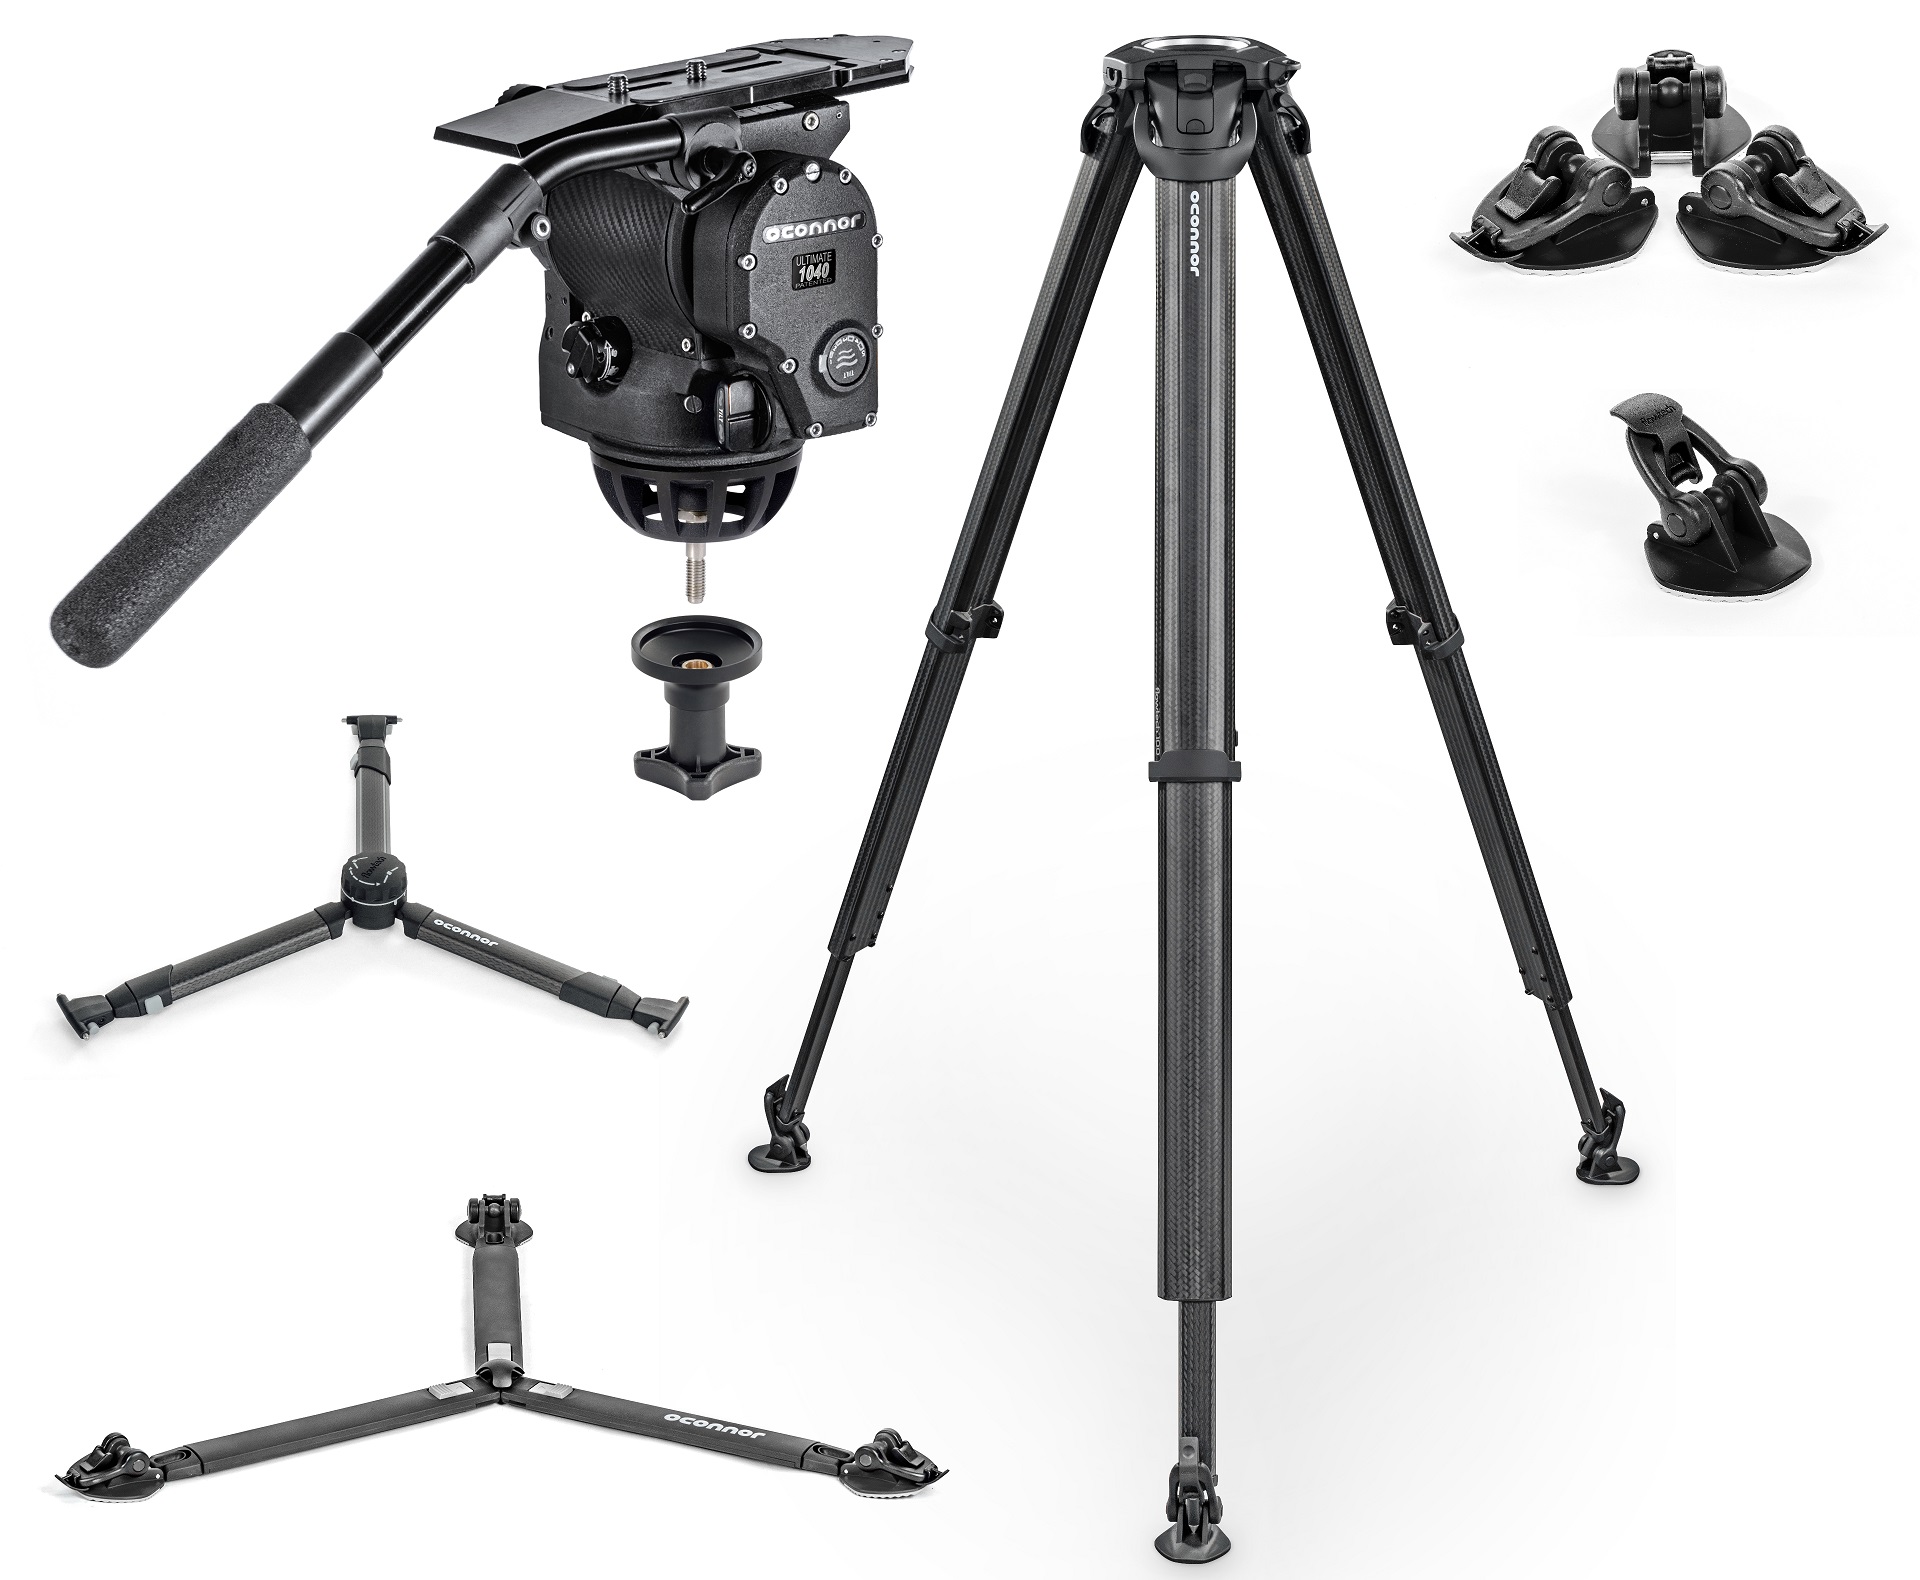 Oconnor flowtech 100 2-Section Carbon Fiber Tripod with Feet and Attachment Mount